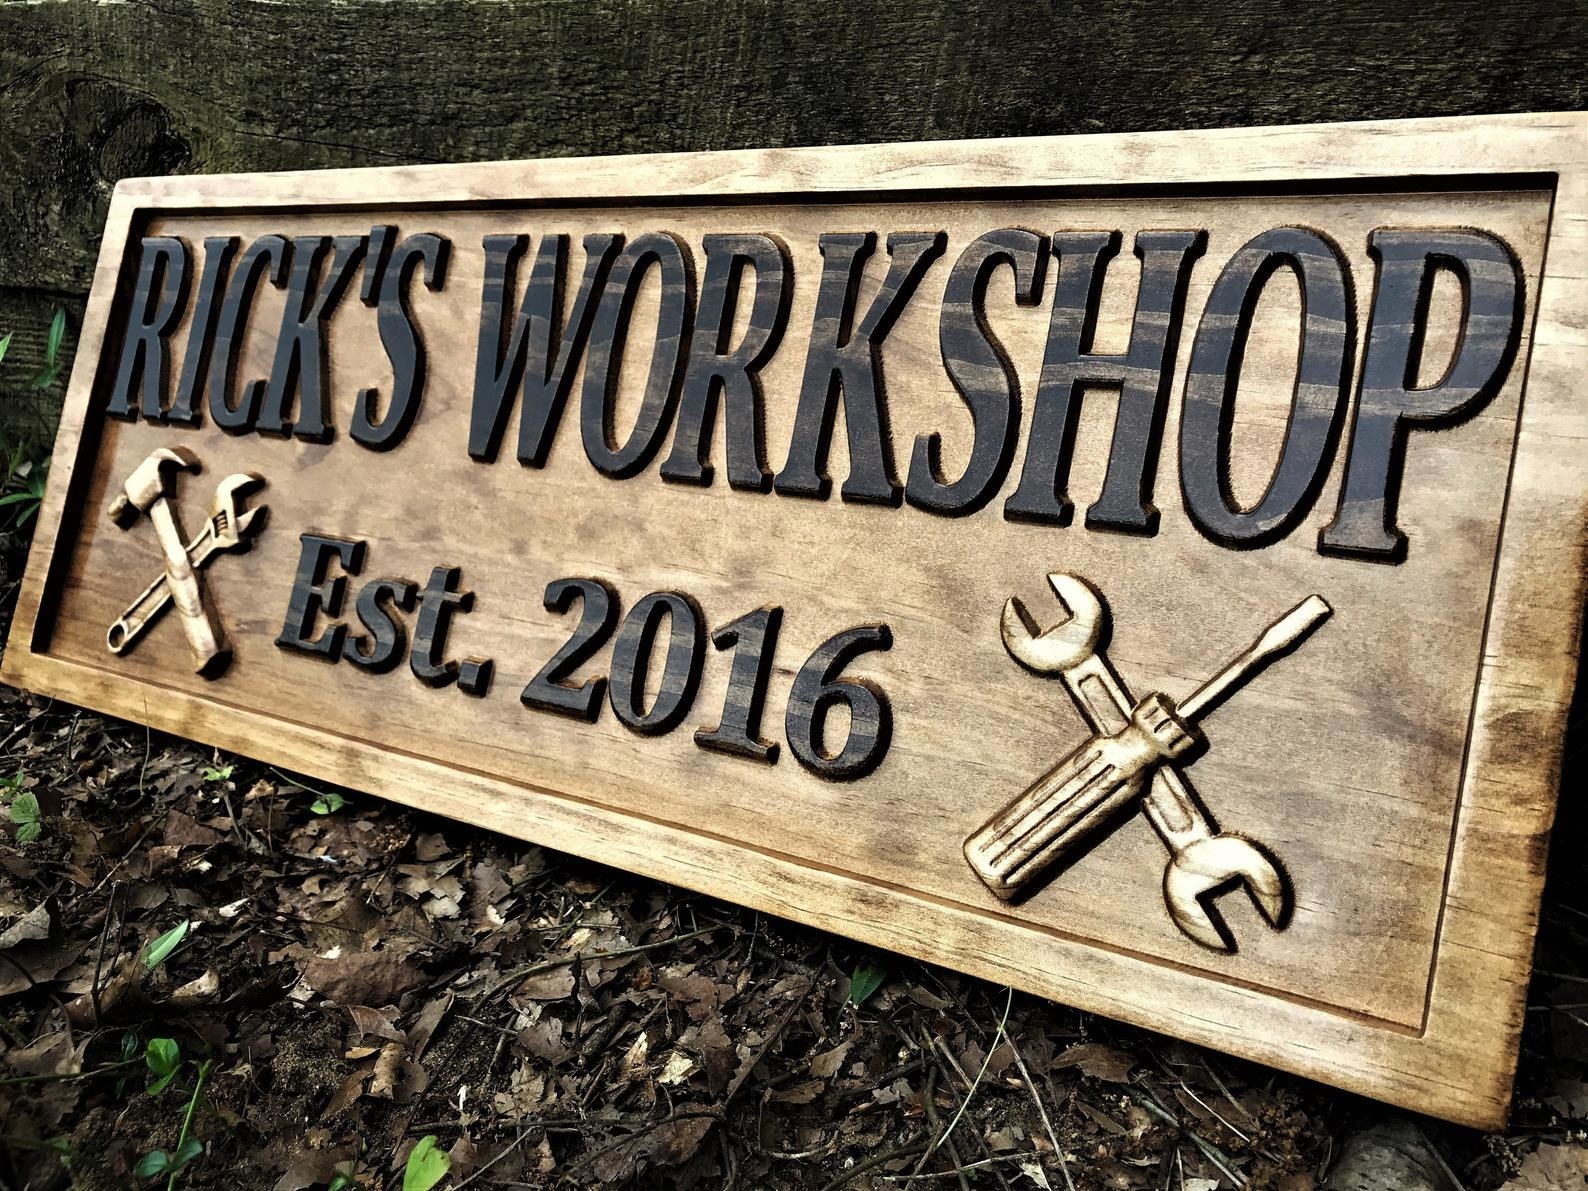 a wooden sign that says rick&#x27;s workshop est 2016 with a images of tools on each end